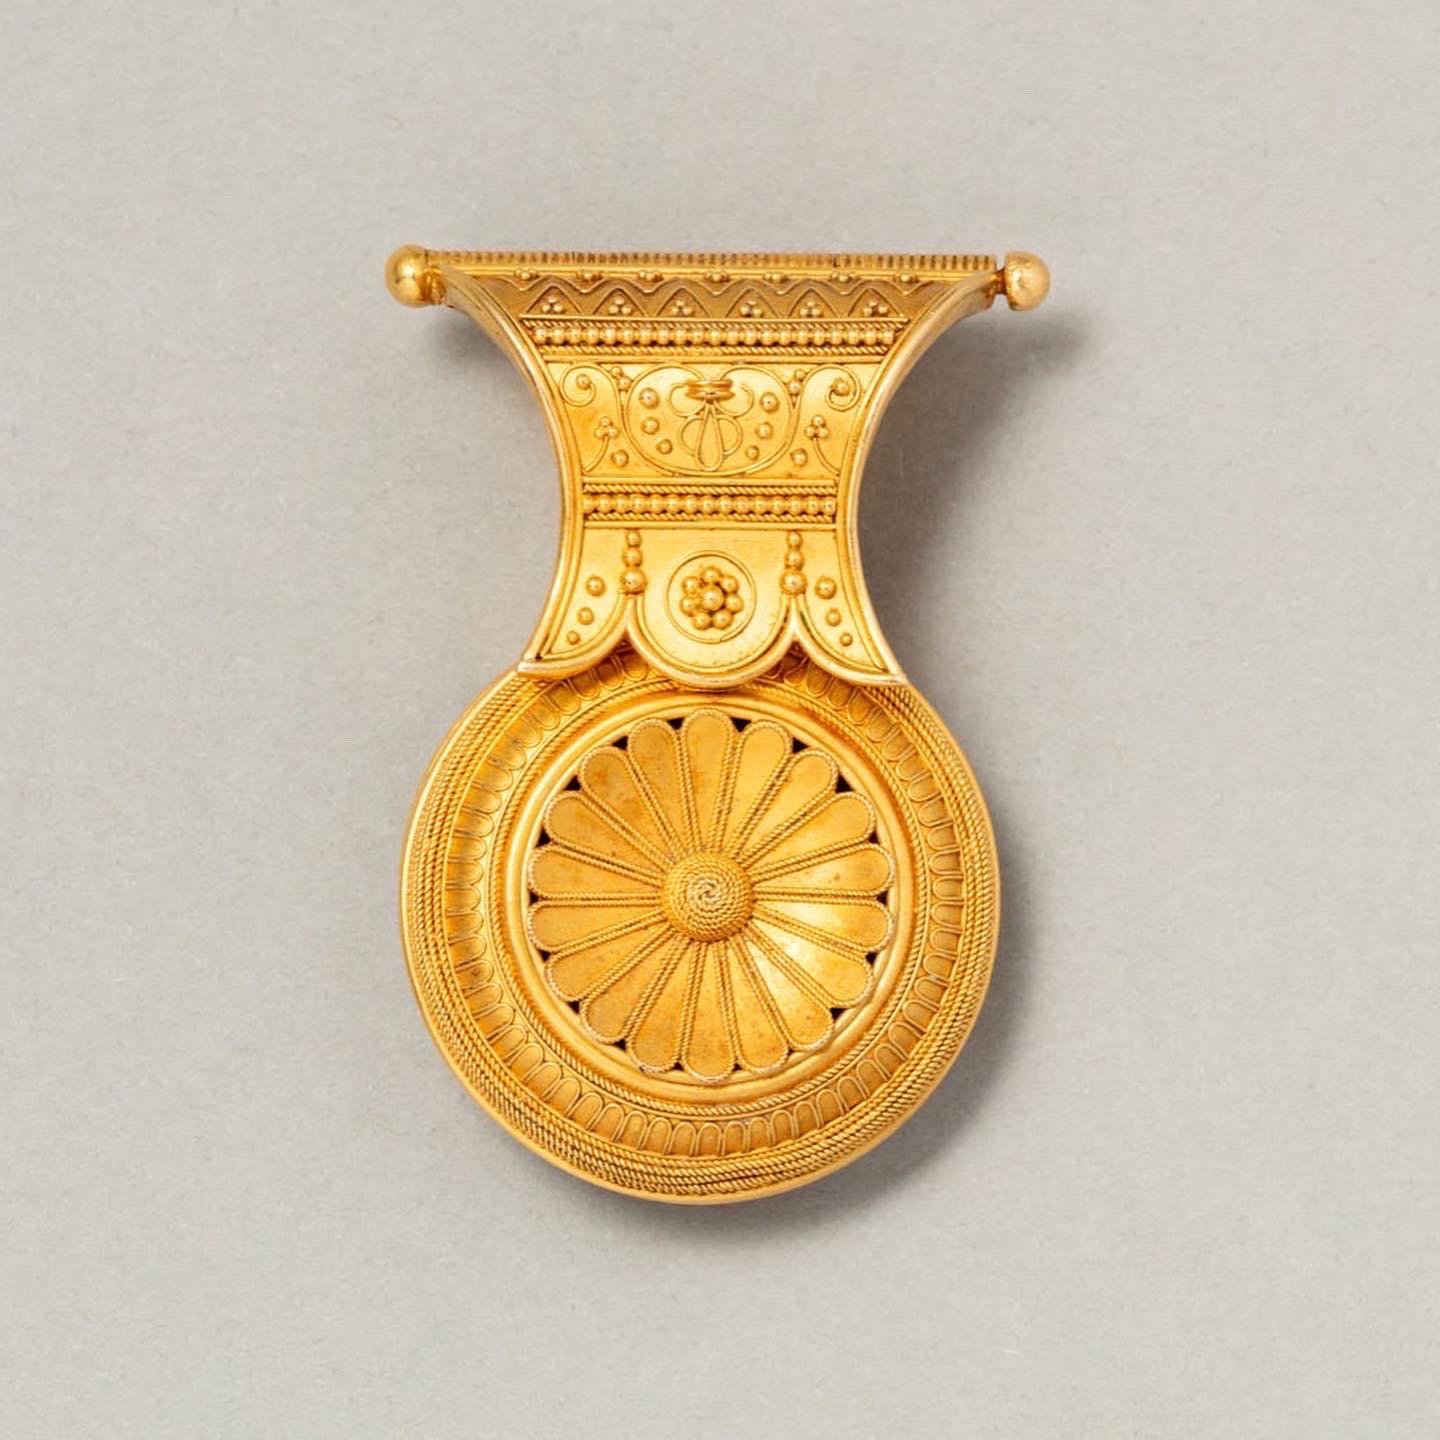 An 18-carat matted gold bulla pendant with two ornate sides. A bulla is a typical Estrucan lentil-shaped ornament that was often worn as a pendant. The Etruscans made jewels in Italy from the 3rd to the 7th century, their style was characterized by